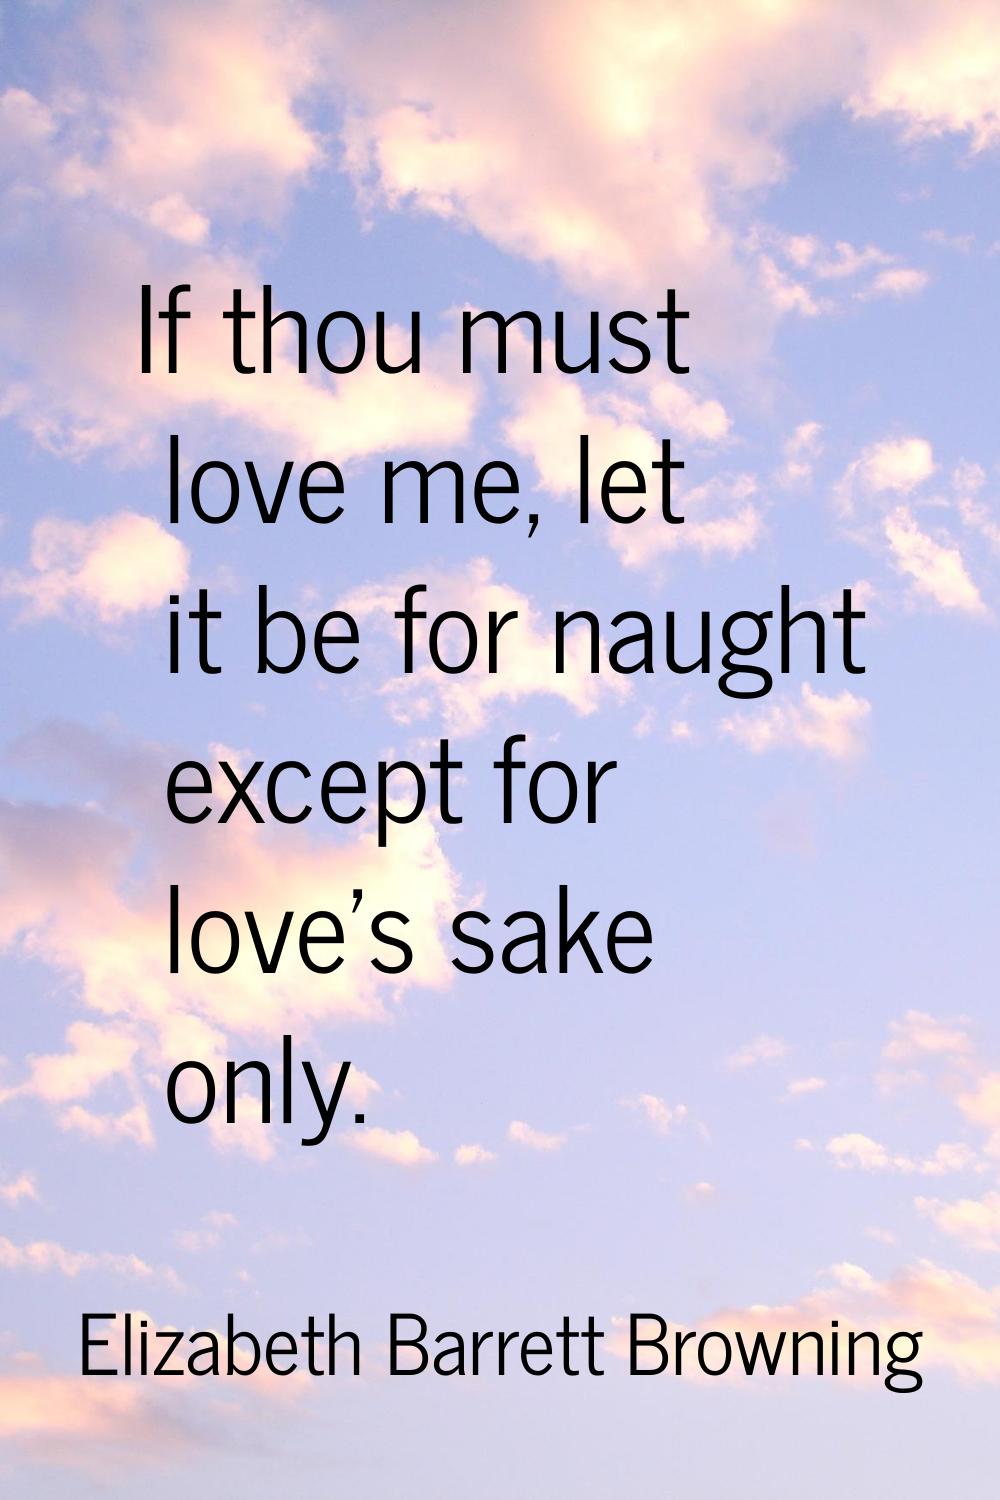 If thou must love me, let it be for naught except for love's sake only.